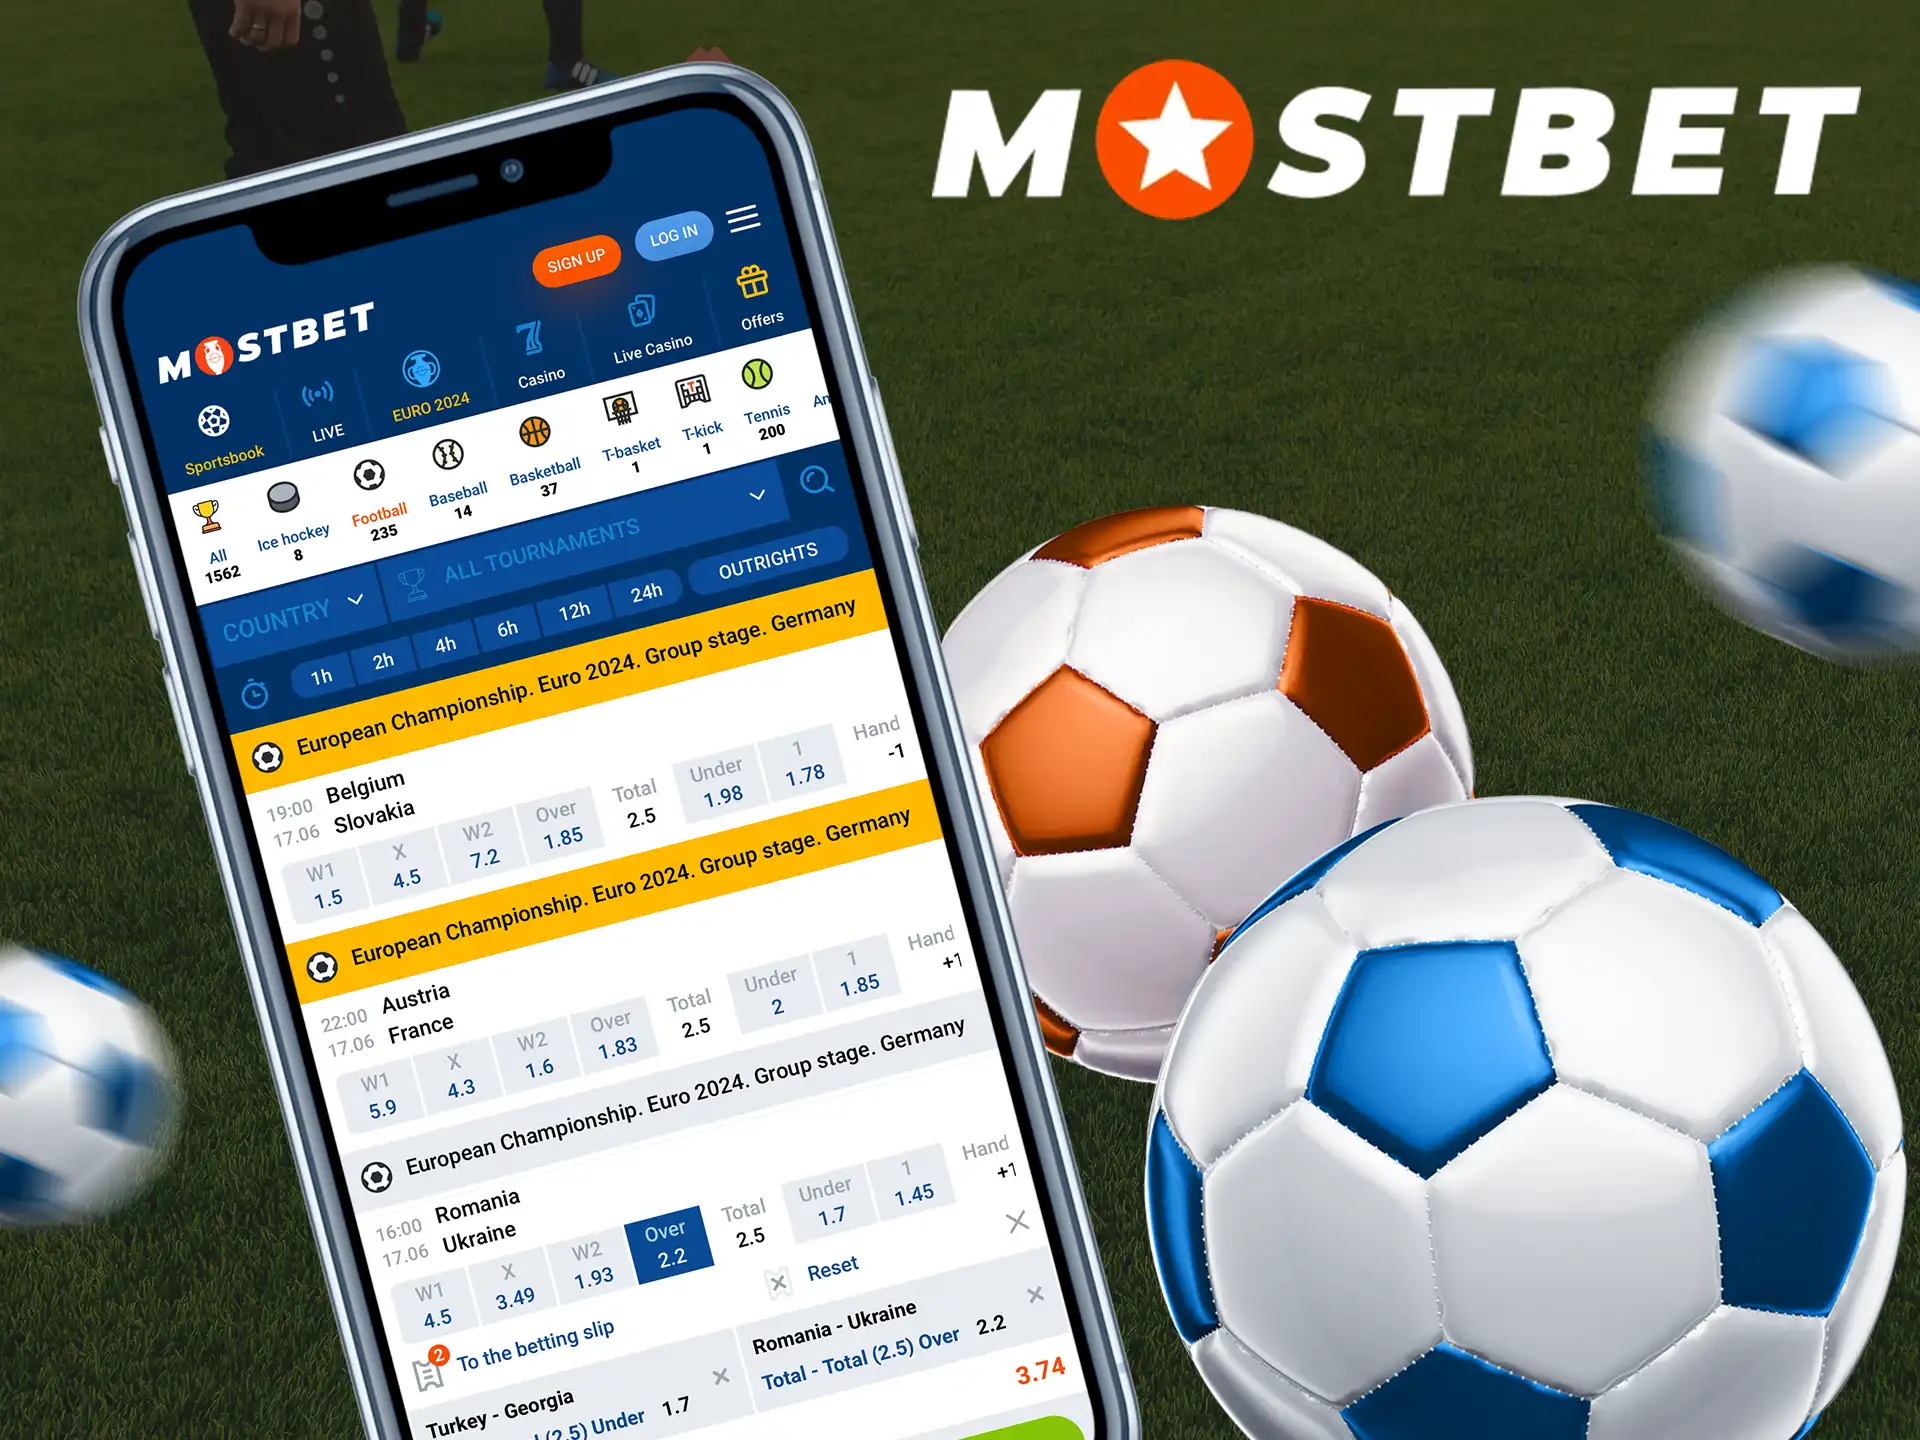 Place your bets from the Mostbet mobile app.